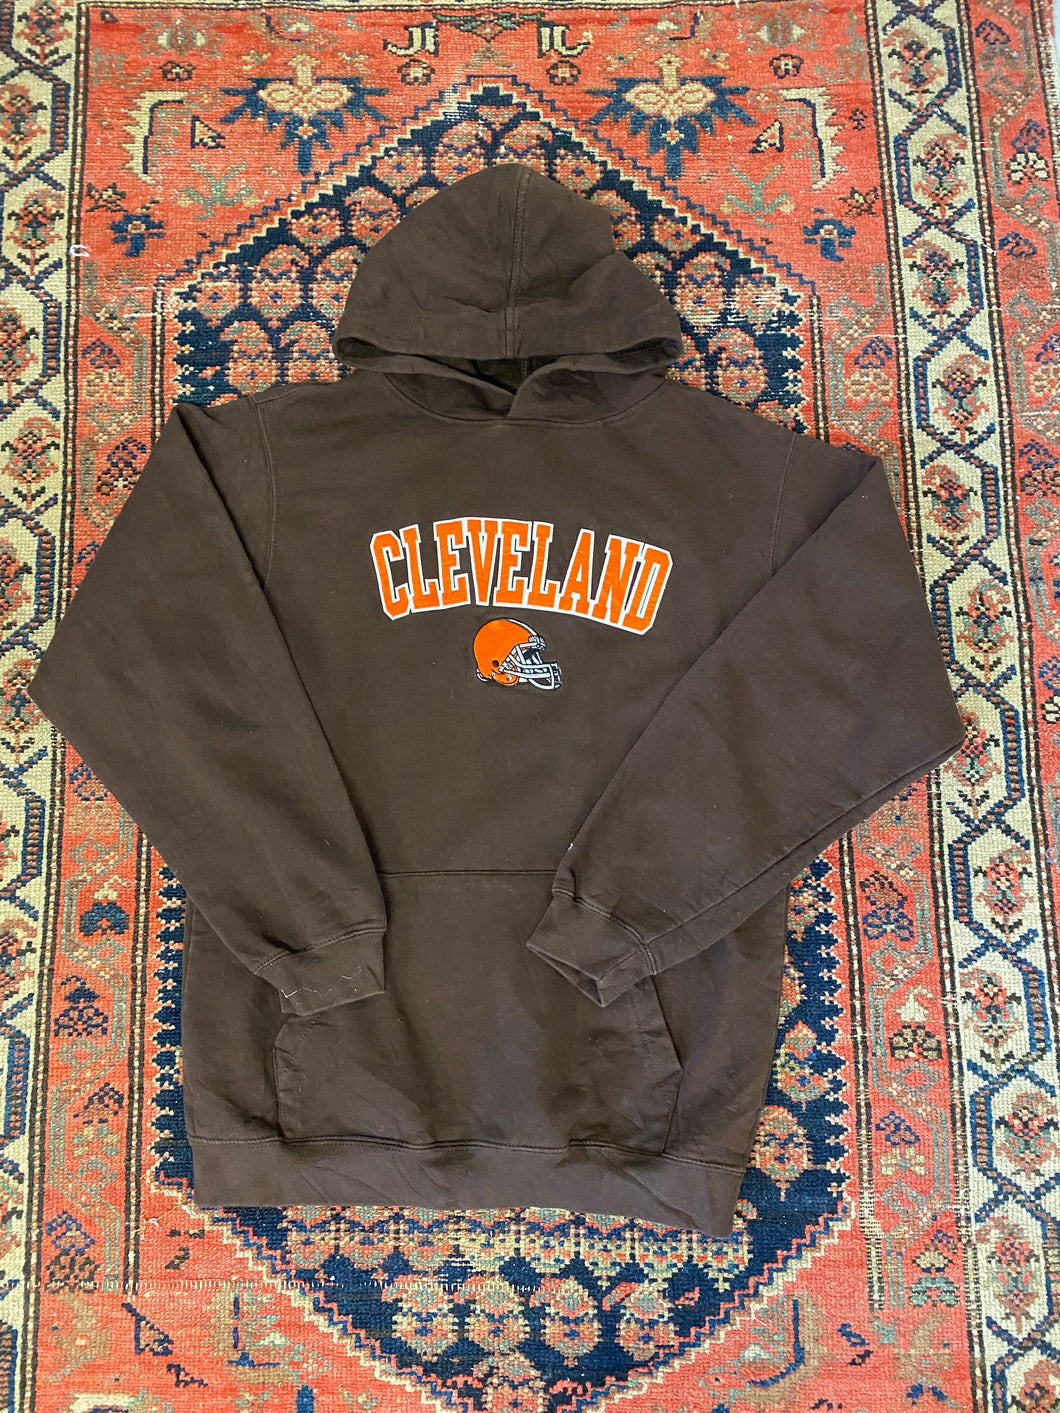 90s Cleveland Browns Hoodie - S